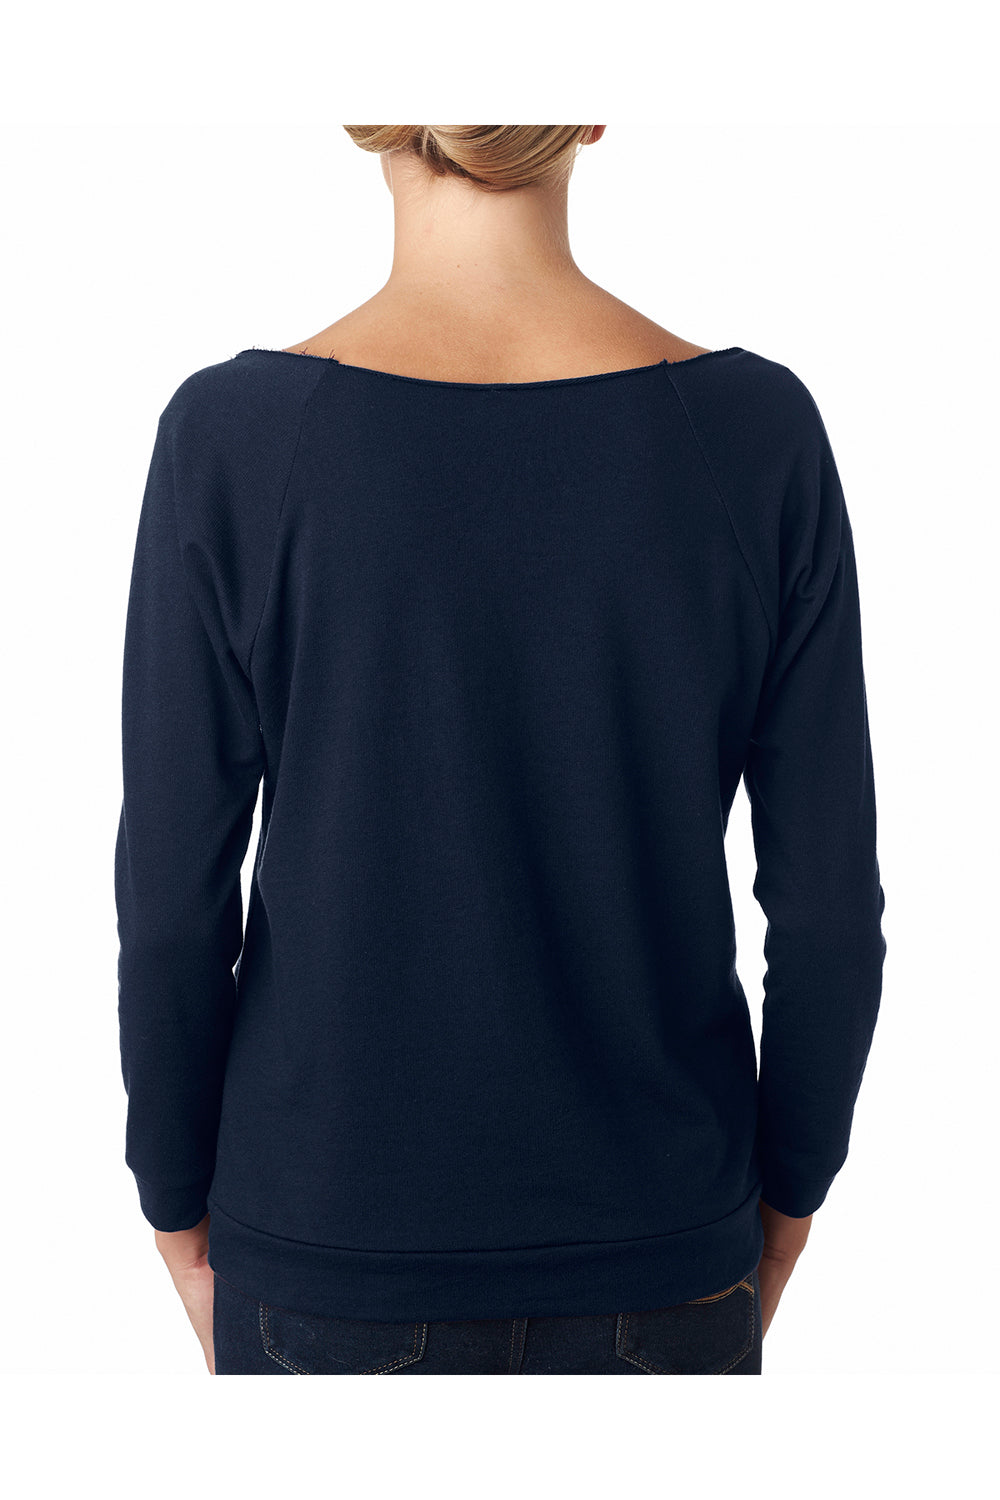 Next Level 6951 Womens French Terry 3/4 Sleeve Wide Neck T-Shirt Navy Blue Back